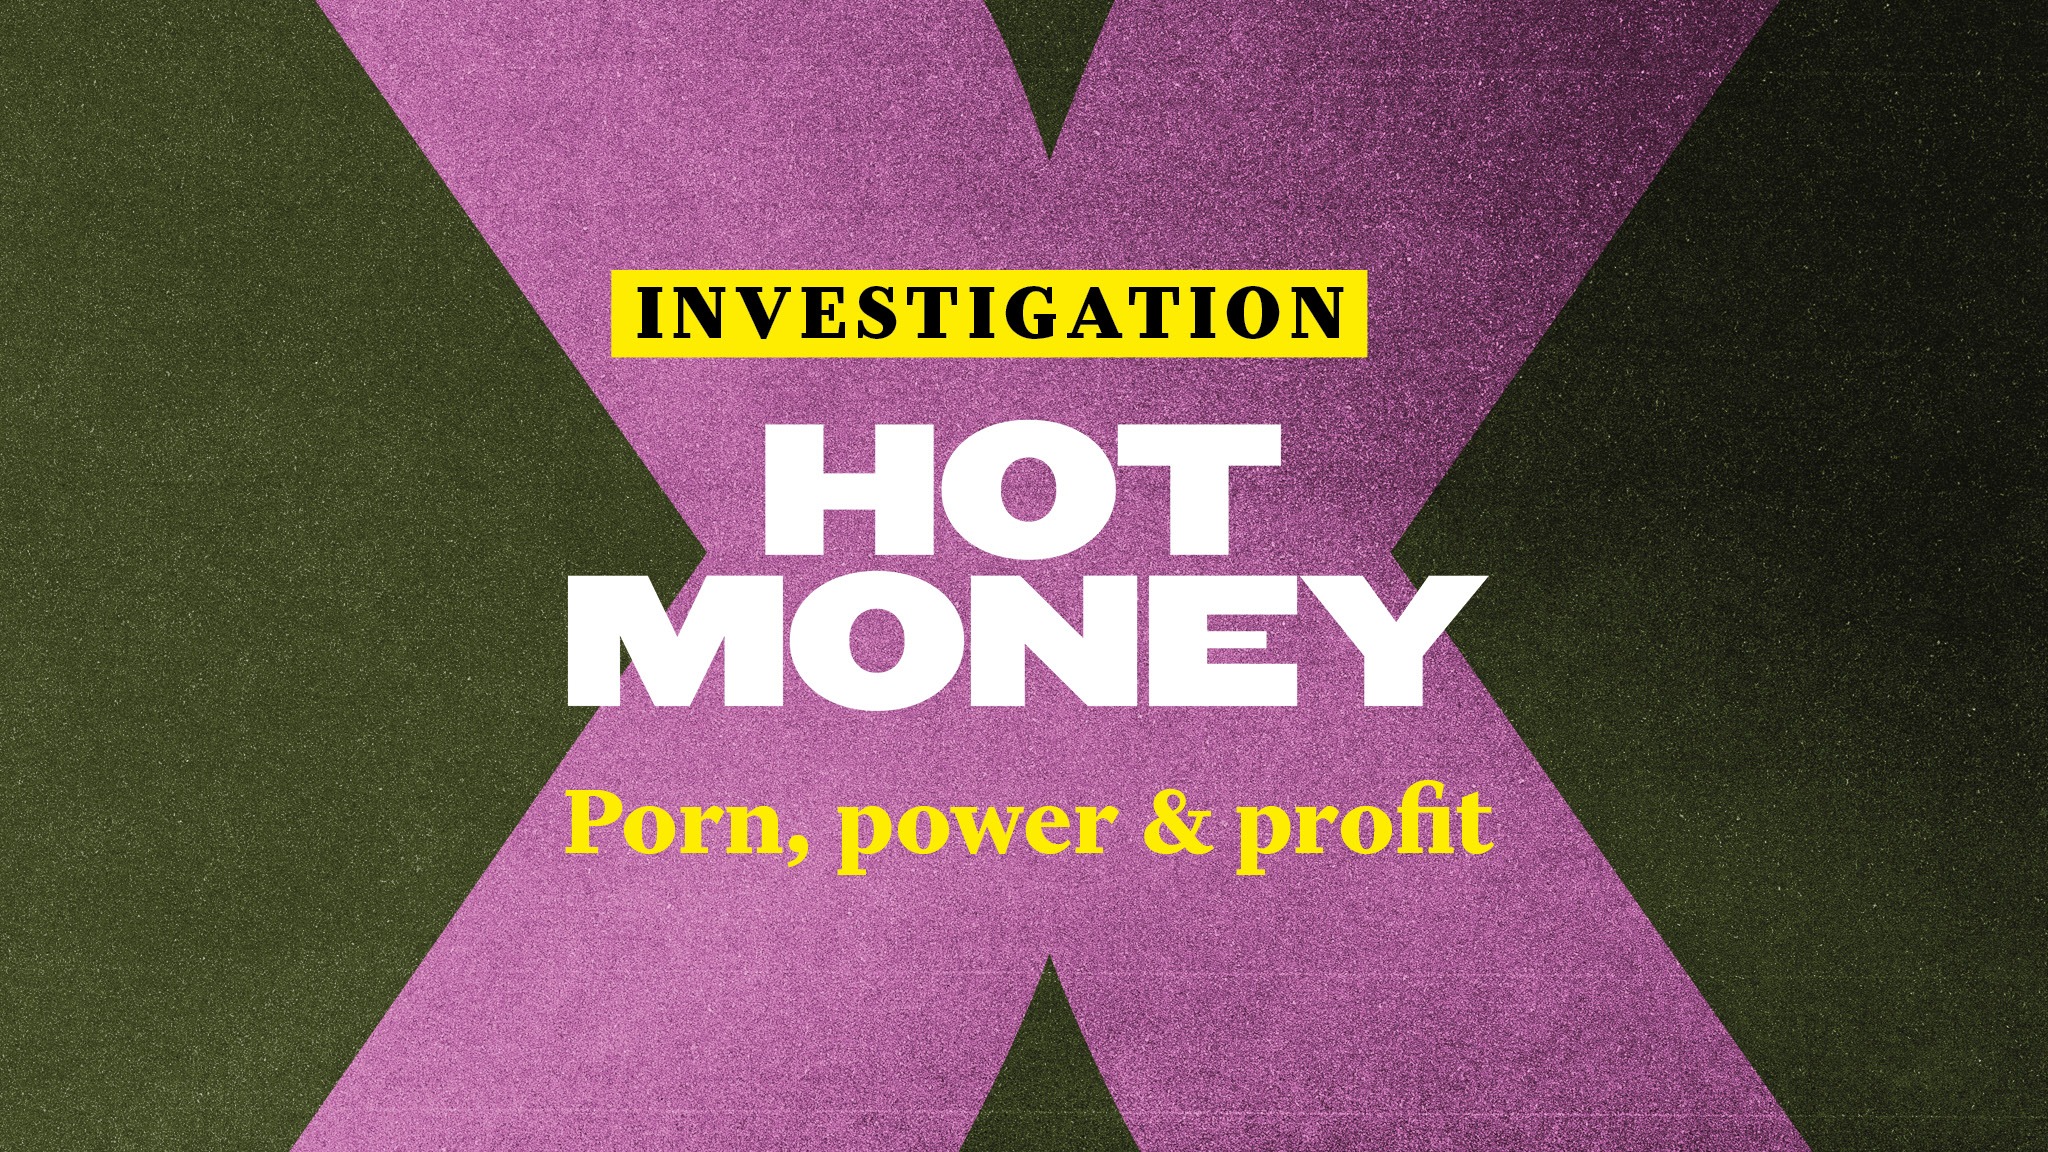 Family Sex Hq Video - Hot Money: porn, power and profit | Financial Times